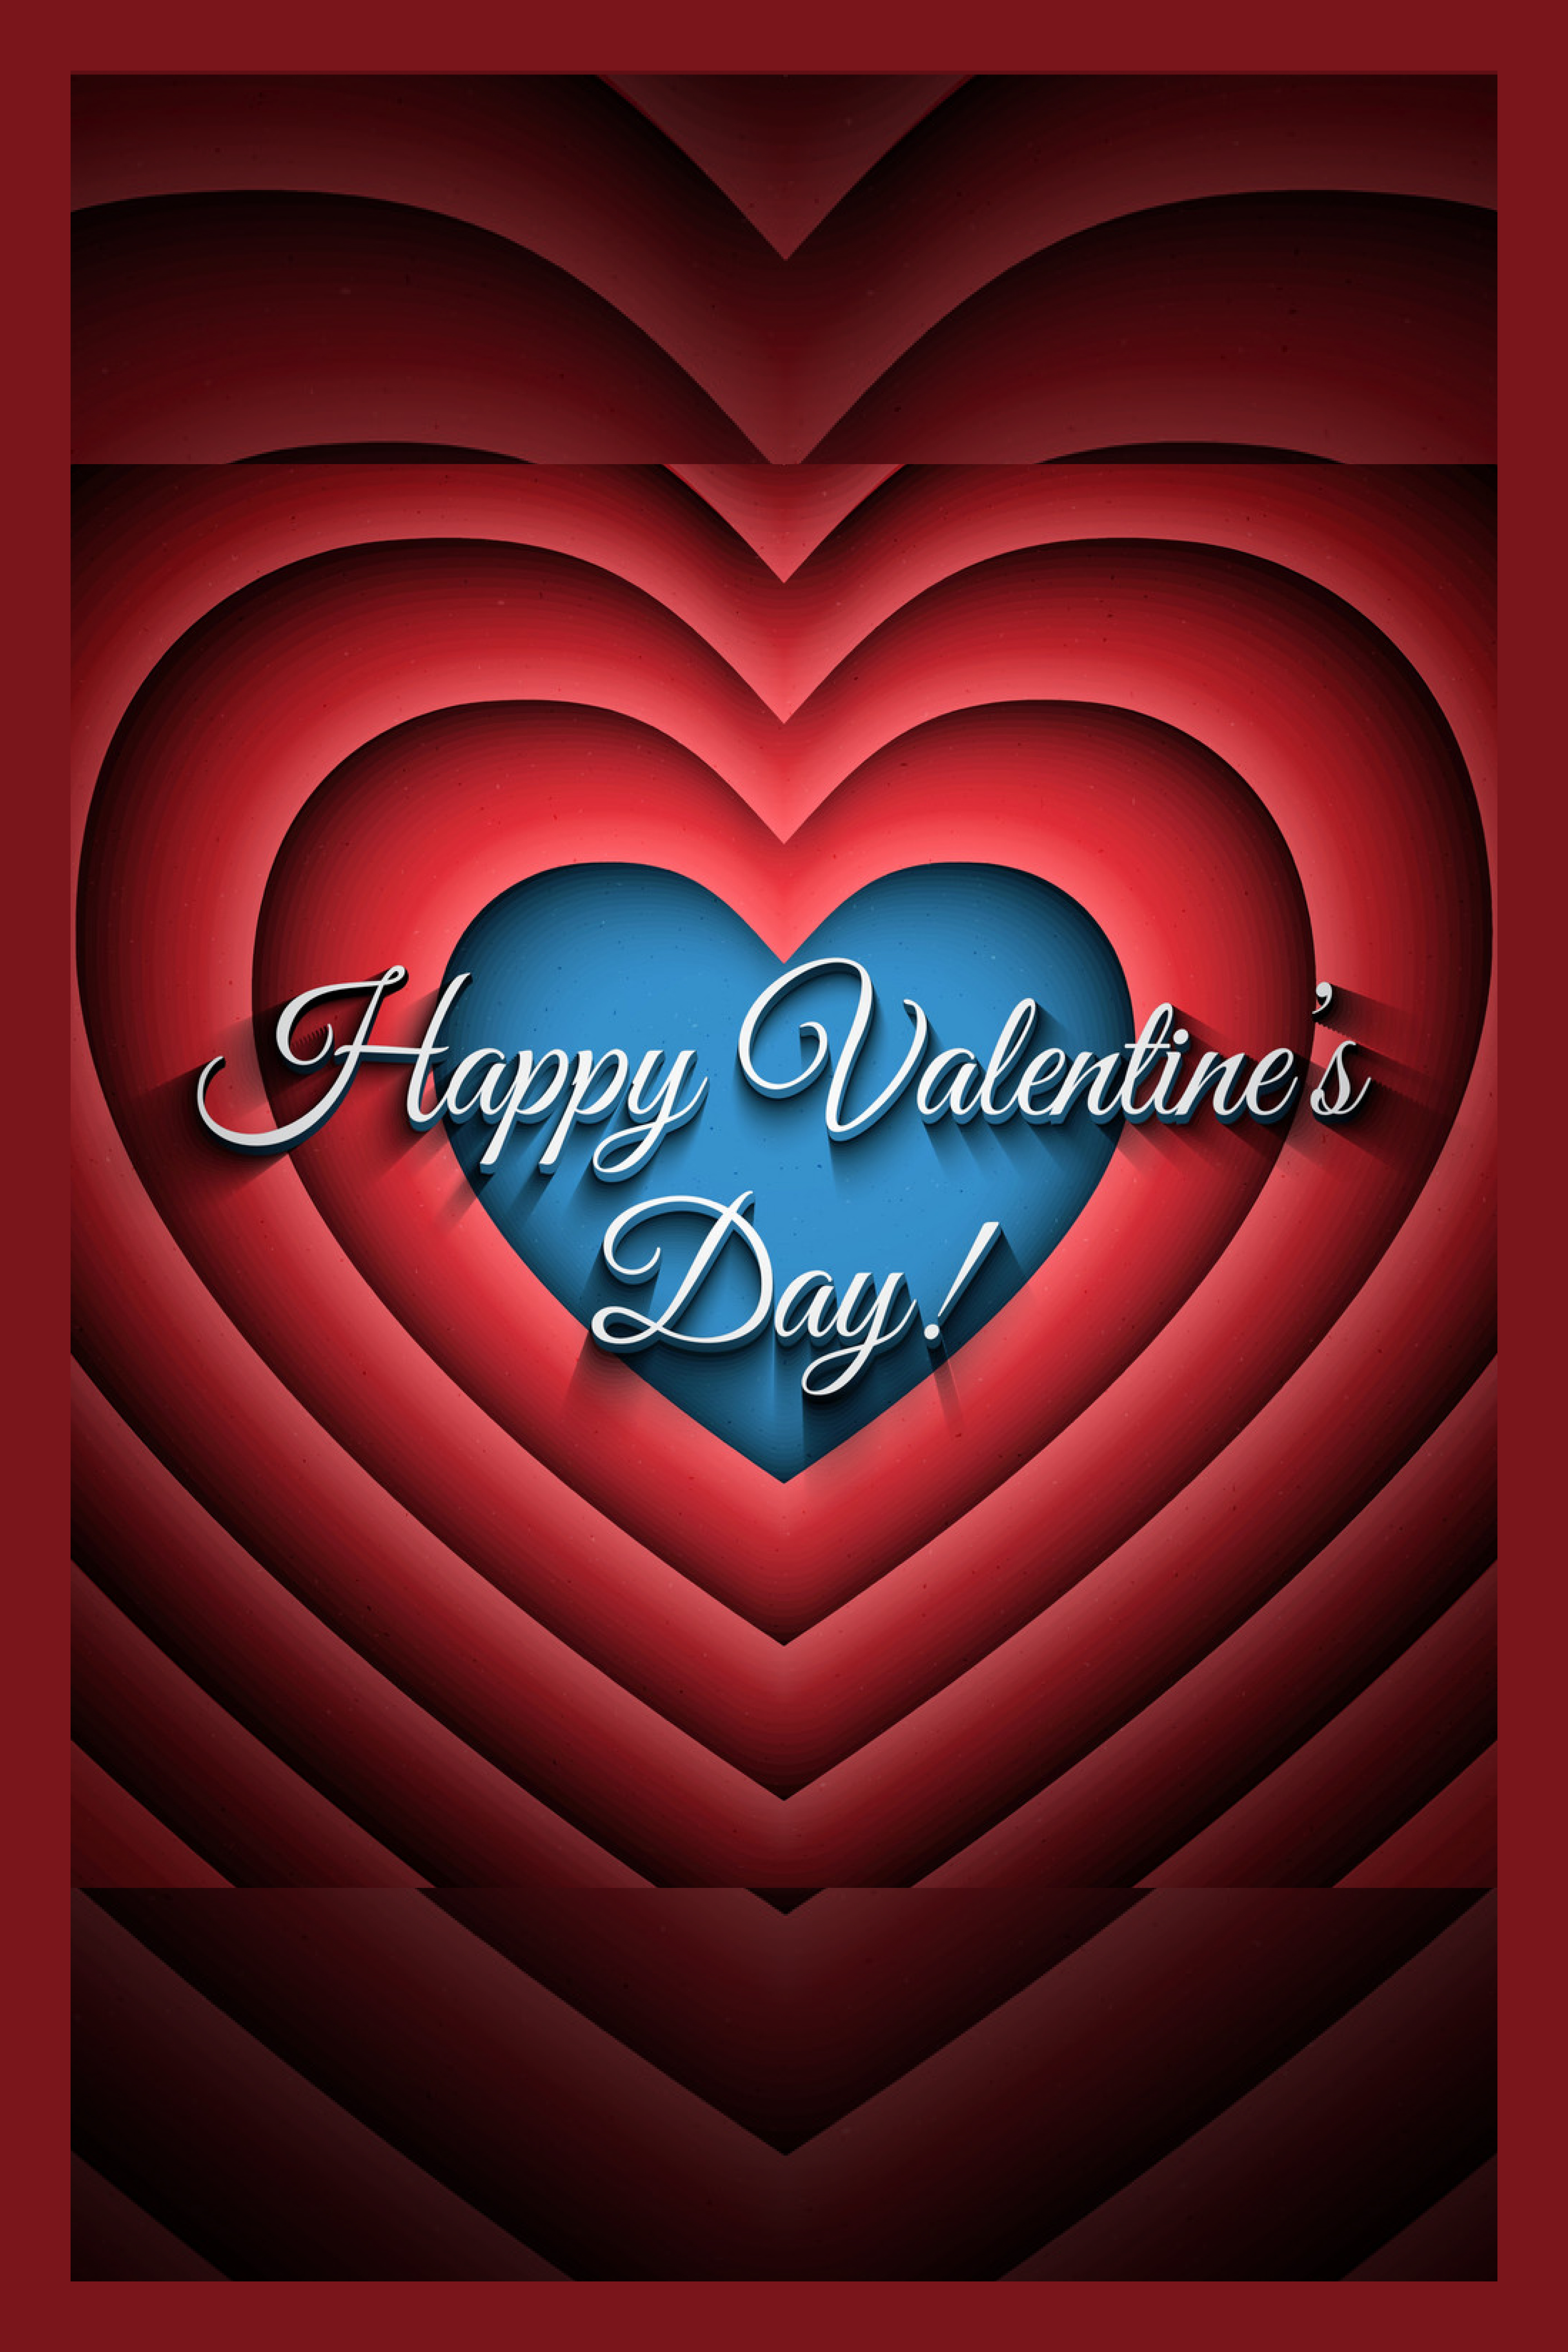 Congratulations on Valentine's Day on the background of red hearts.